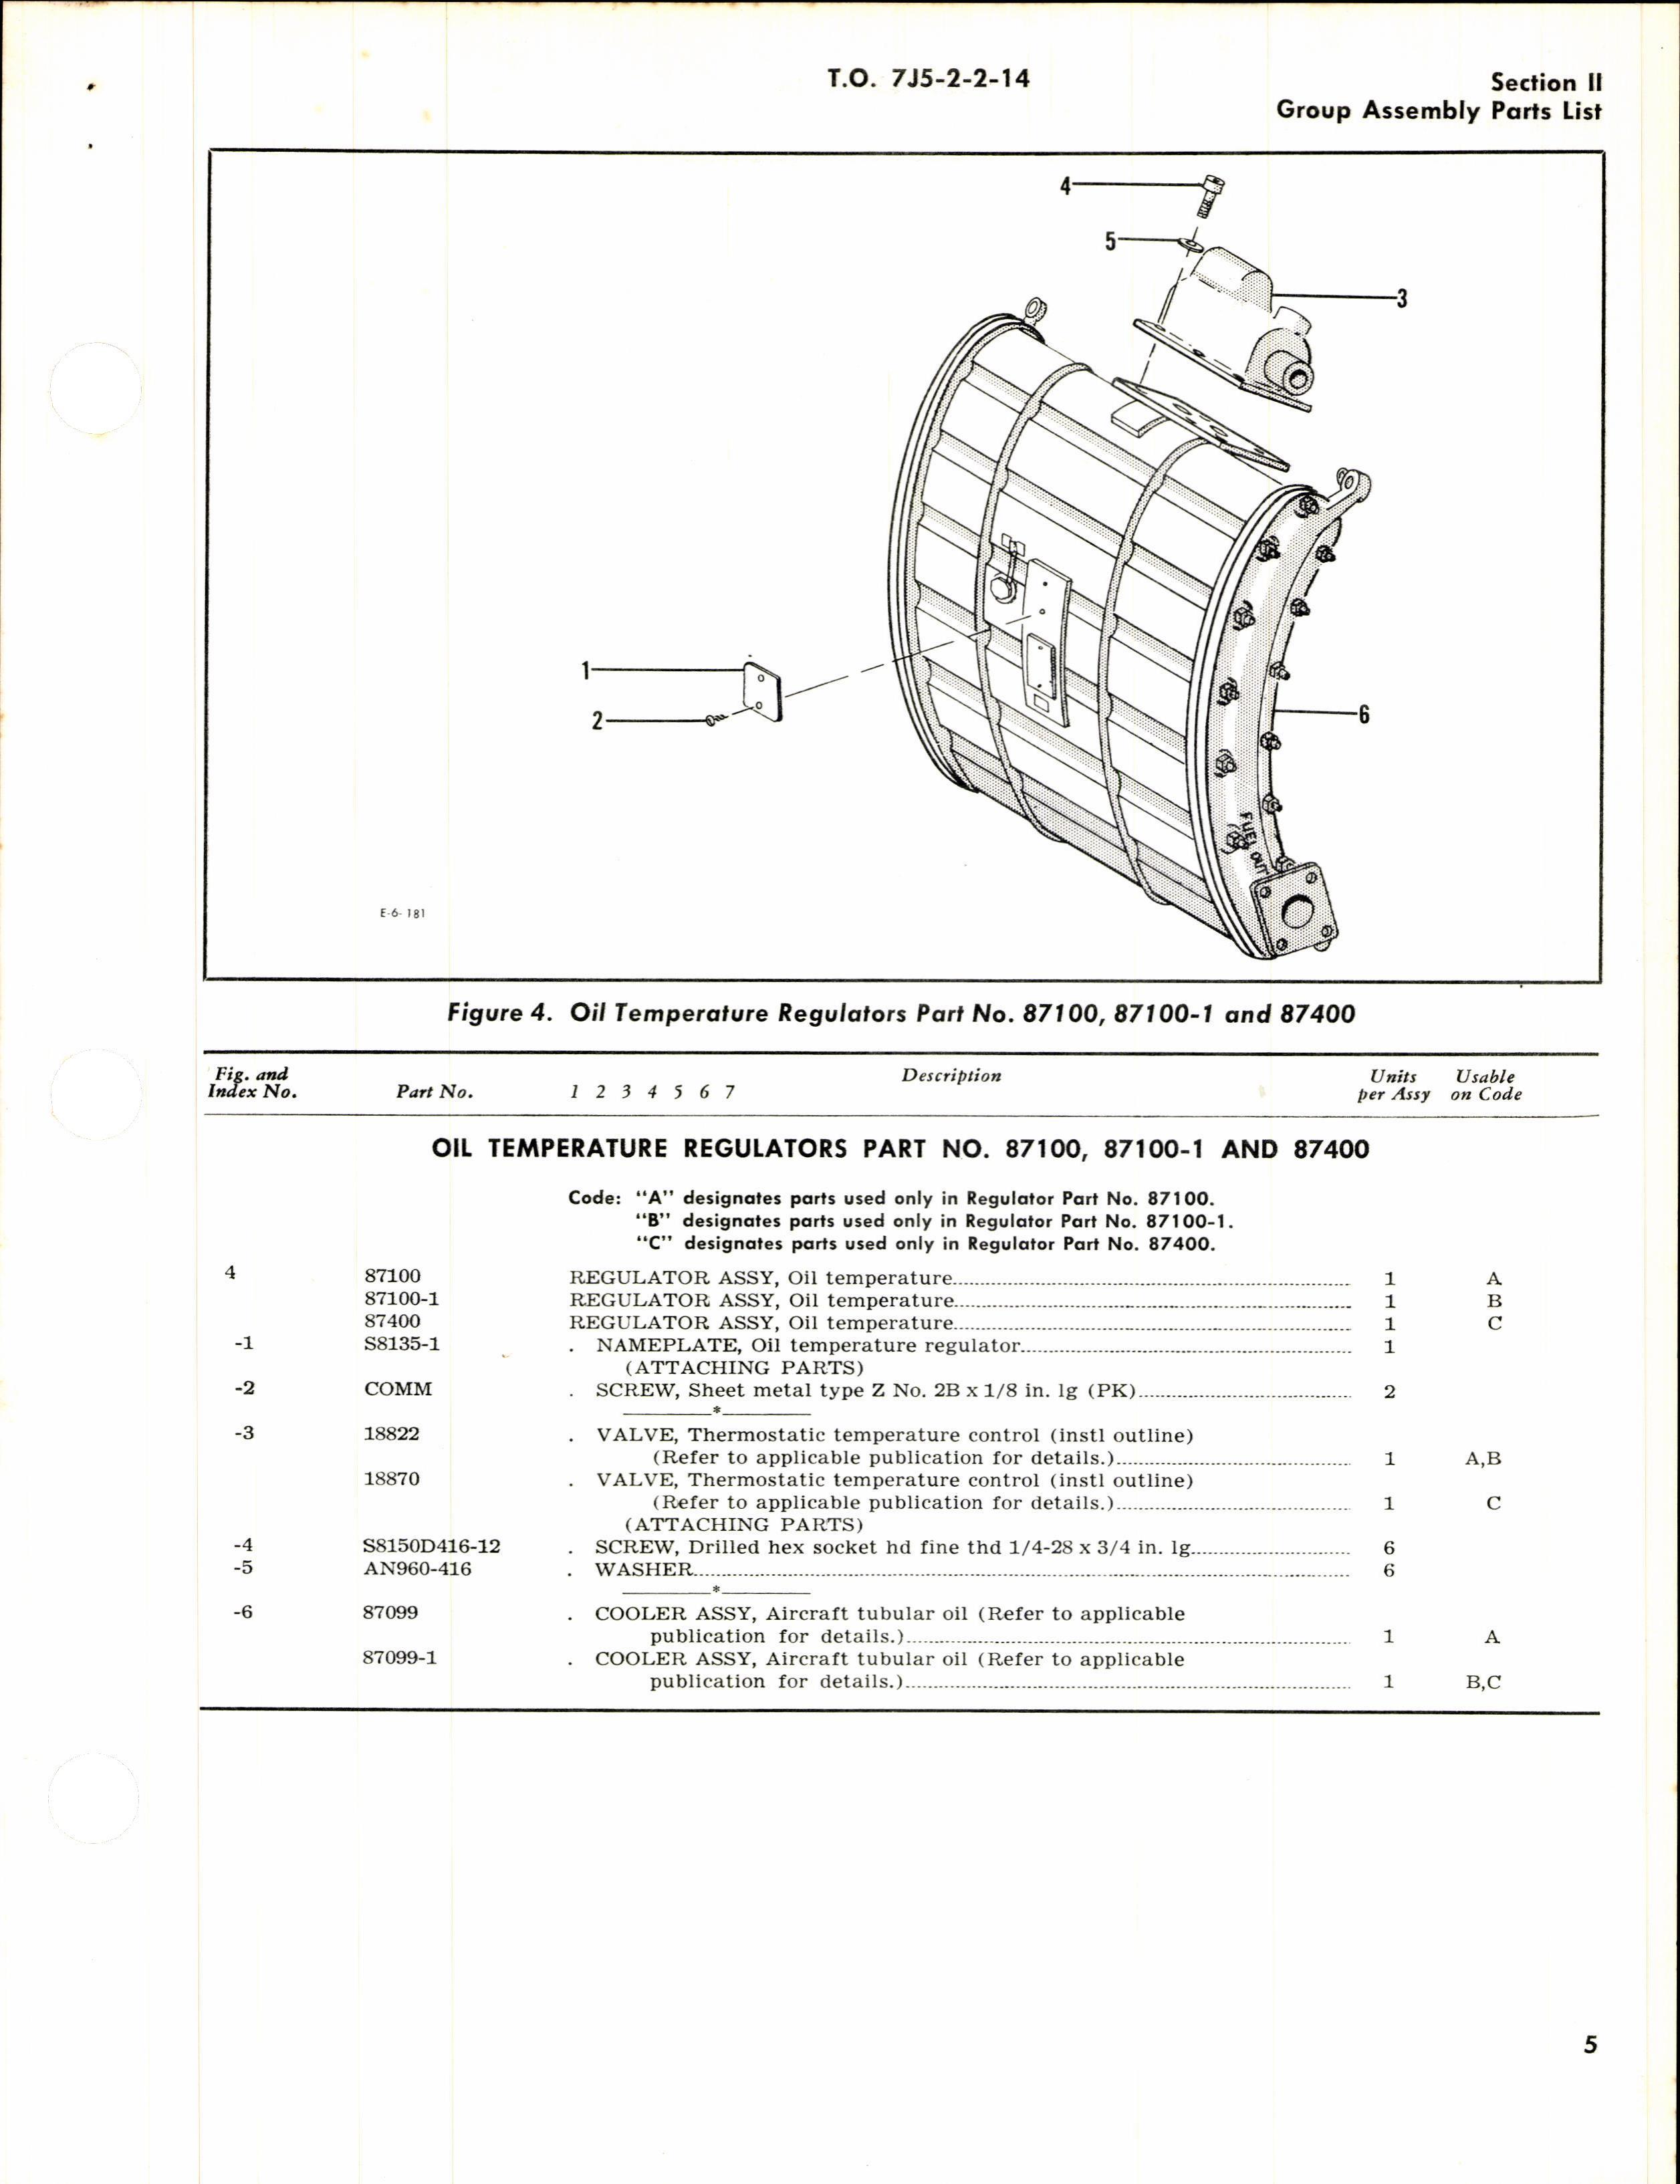 Sample page 7 from AirCorps Library document: Illustrated Parts Breakdown for Oil Temperature Regulators, Heat Exchanges, and Fuel Temperature Regulators 